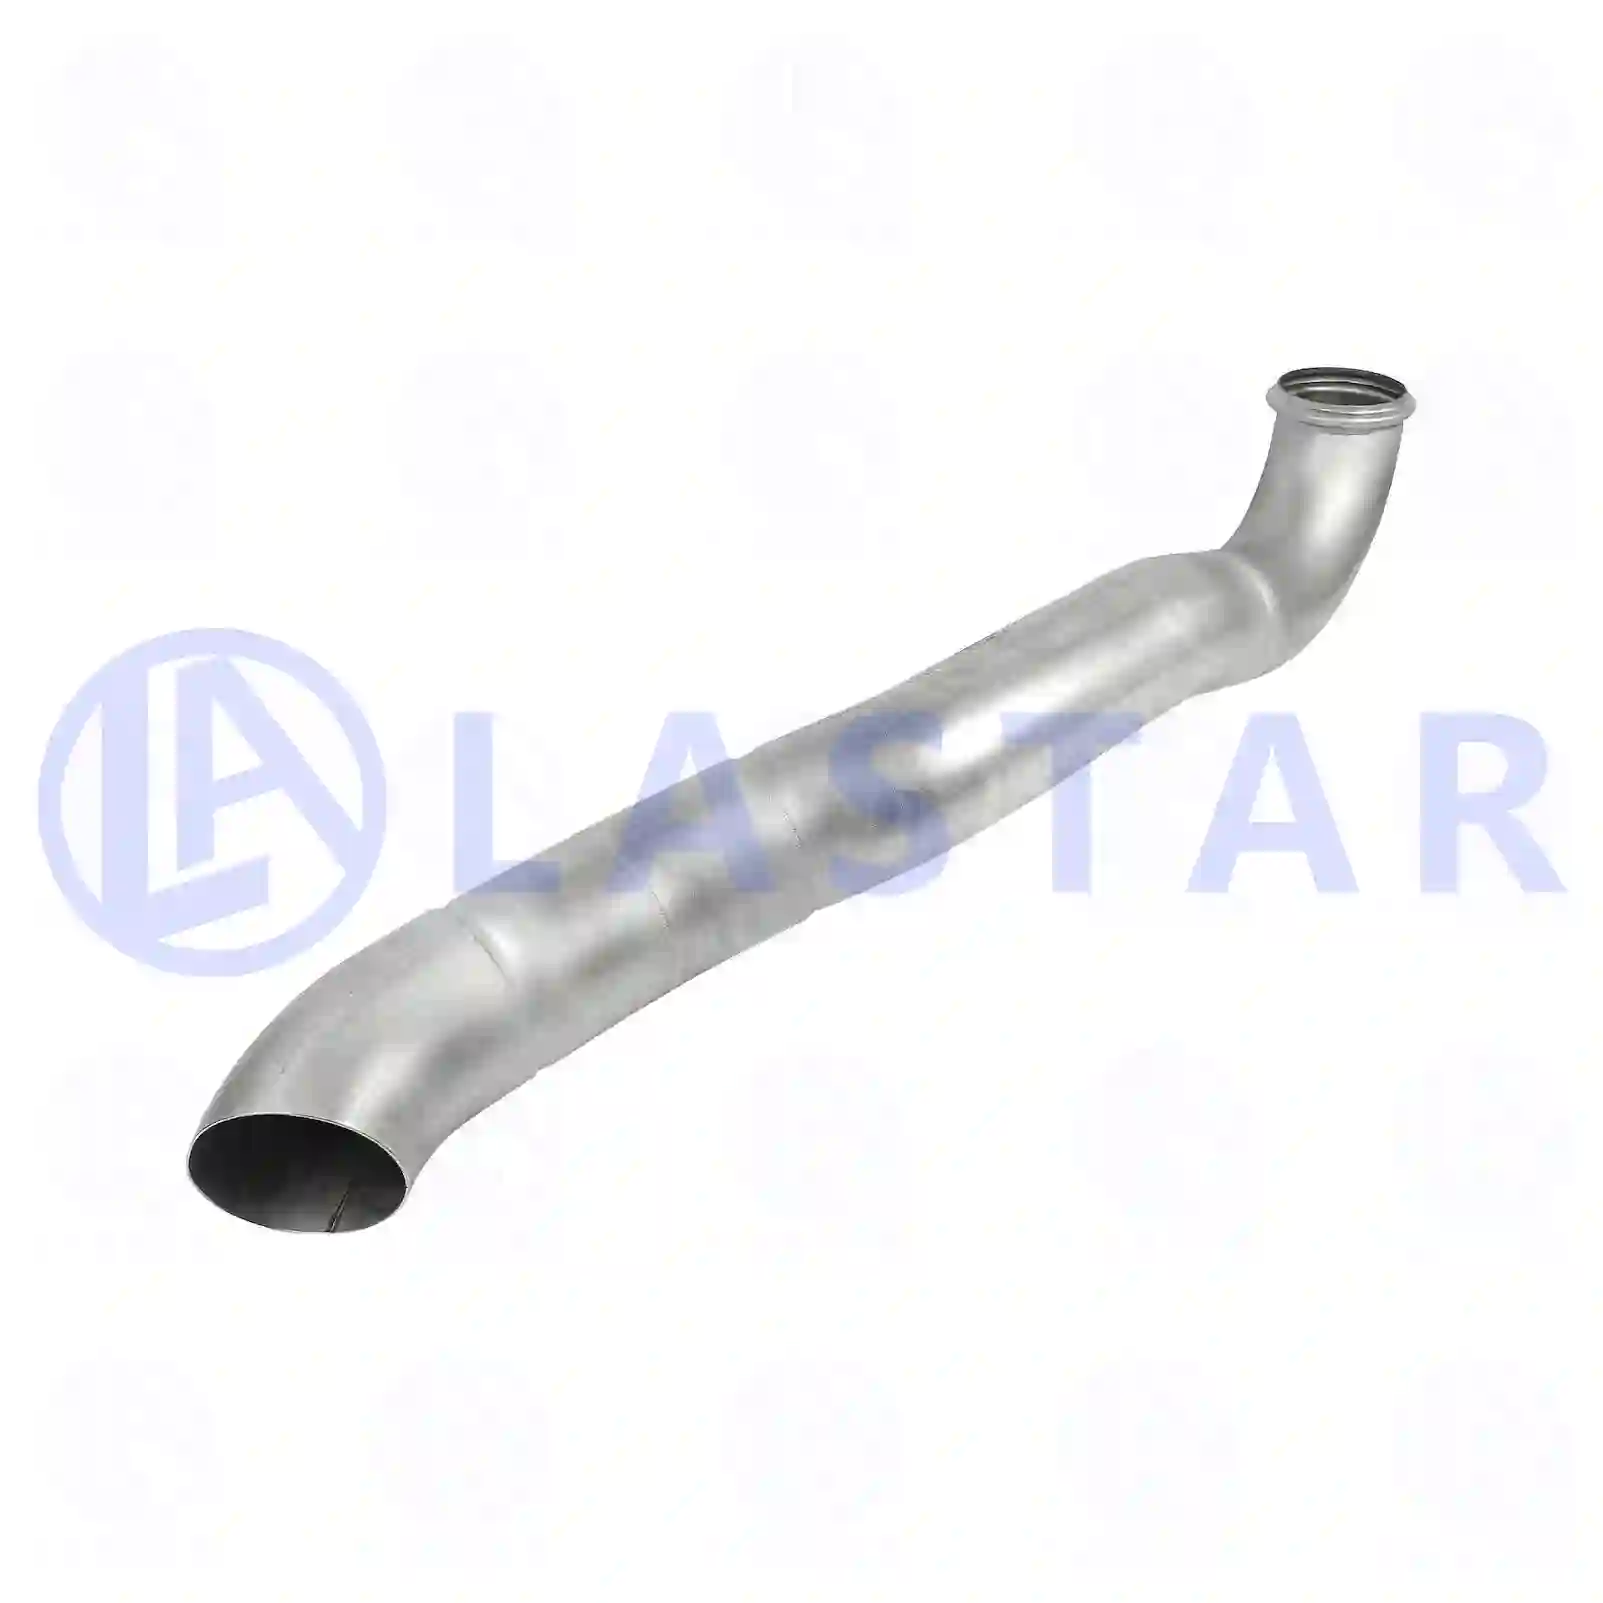 Exhaust pipe, 77706895, 20801913, ZG10297-0008 ||  77706895 Lastar Spare Part | Truck Spare Parts, Auotomotive Spare Parts Exhaust pipe, 77706895, 20801913, ZG10297-0008 ||  77706895 Lastar Spare Part | Truck Spare Parts, Auotomotive Spare Parts